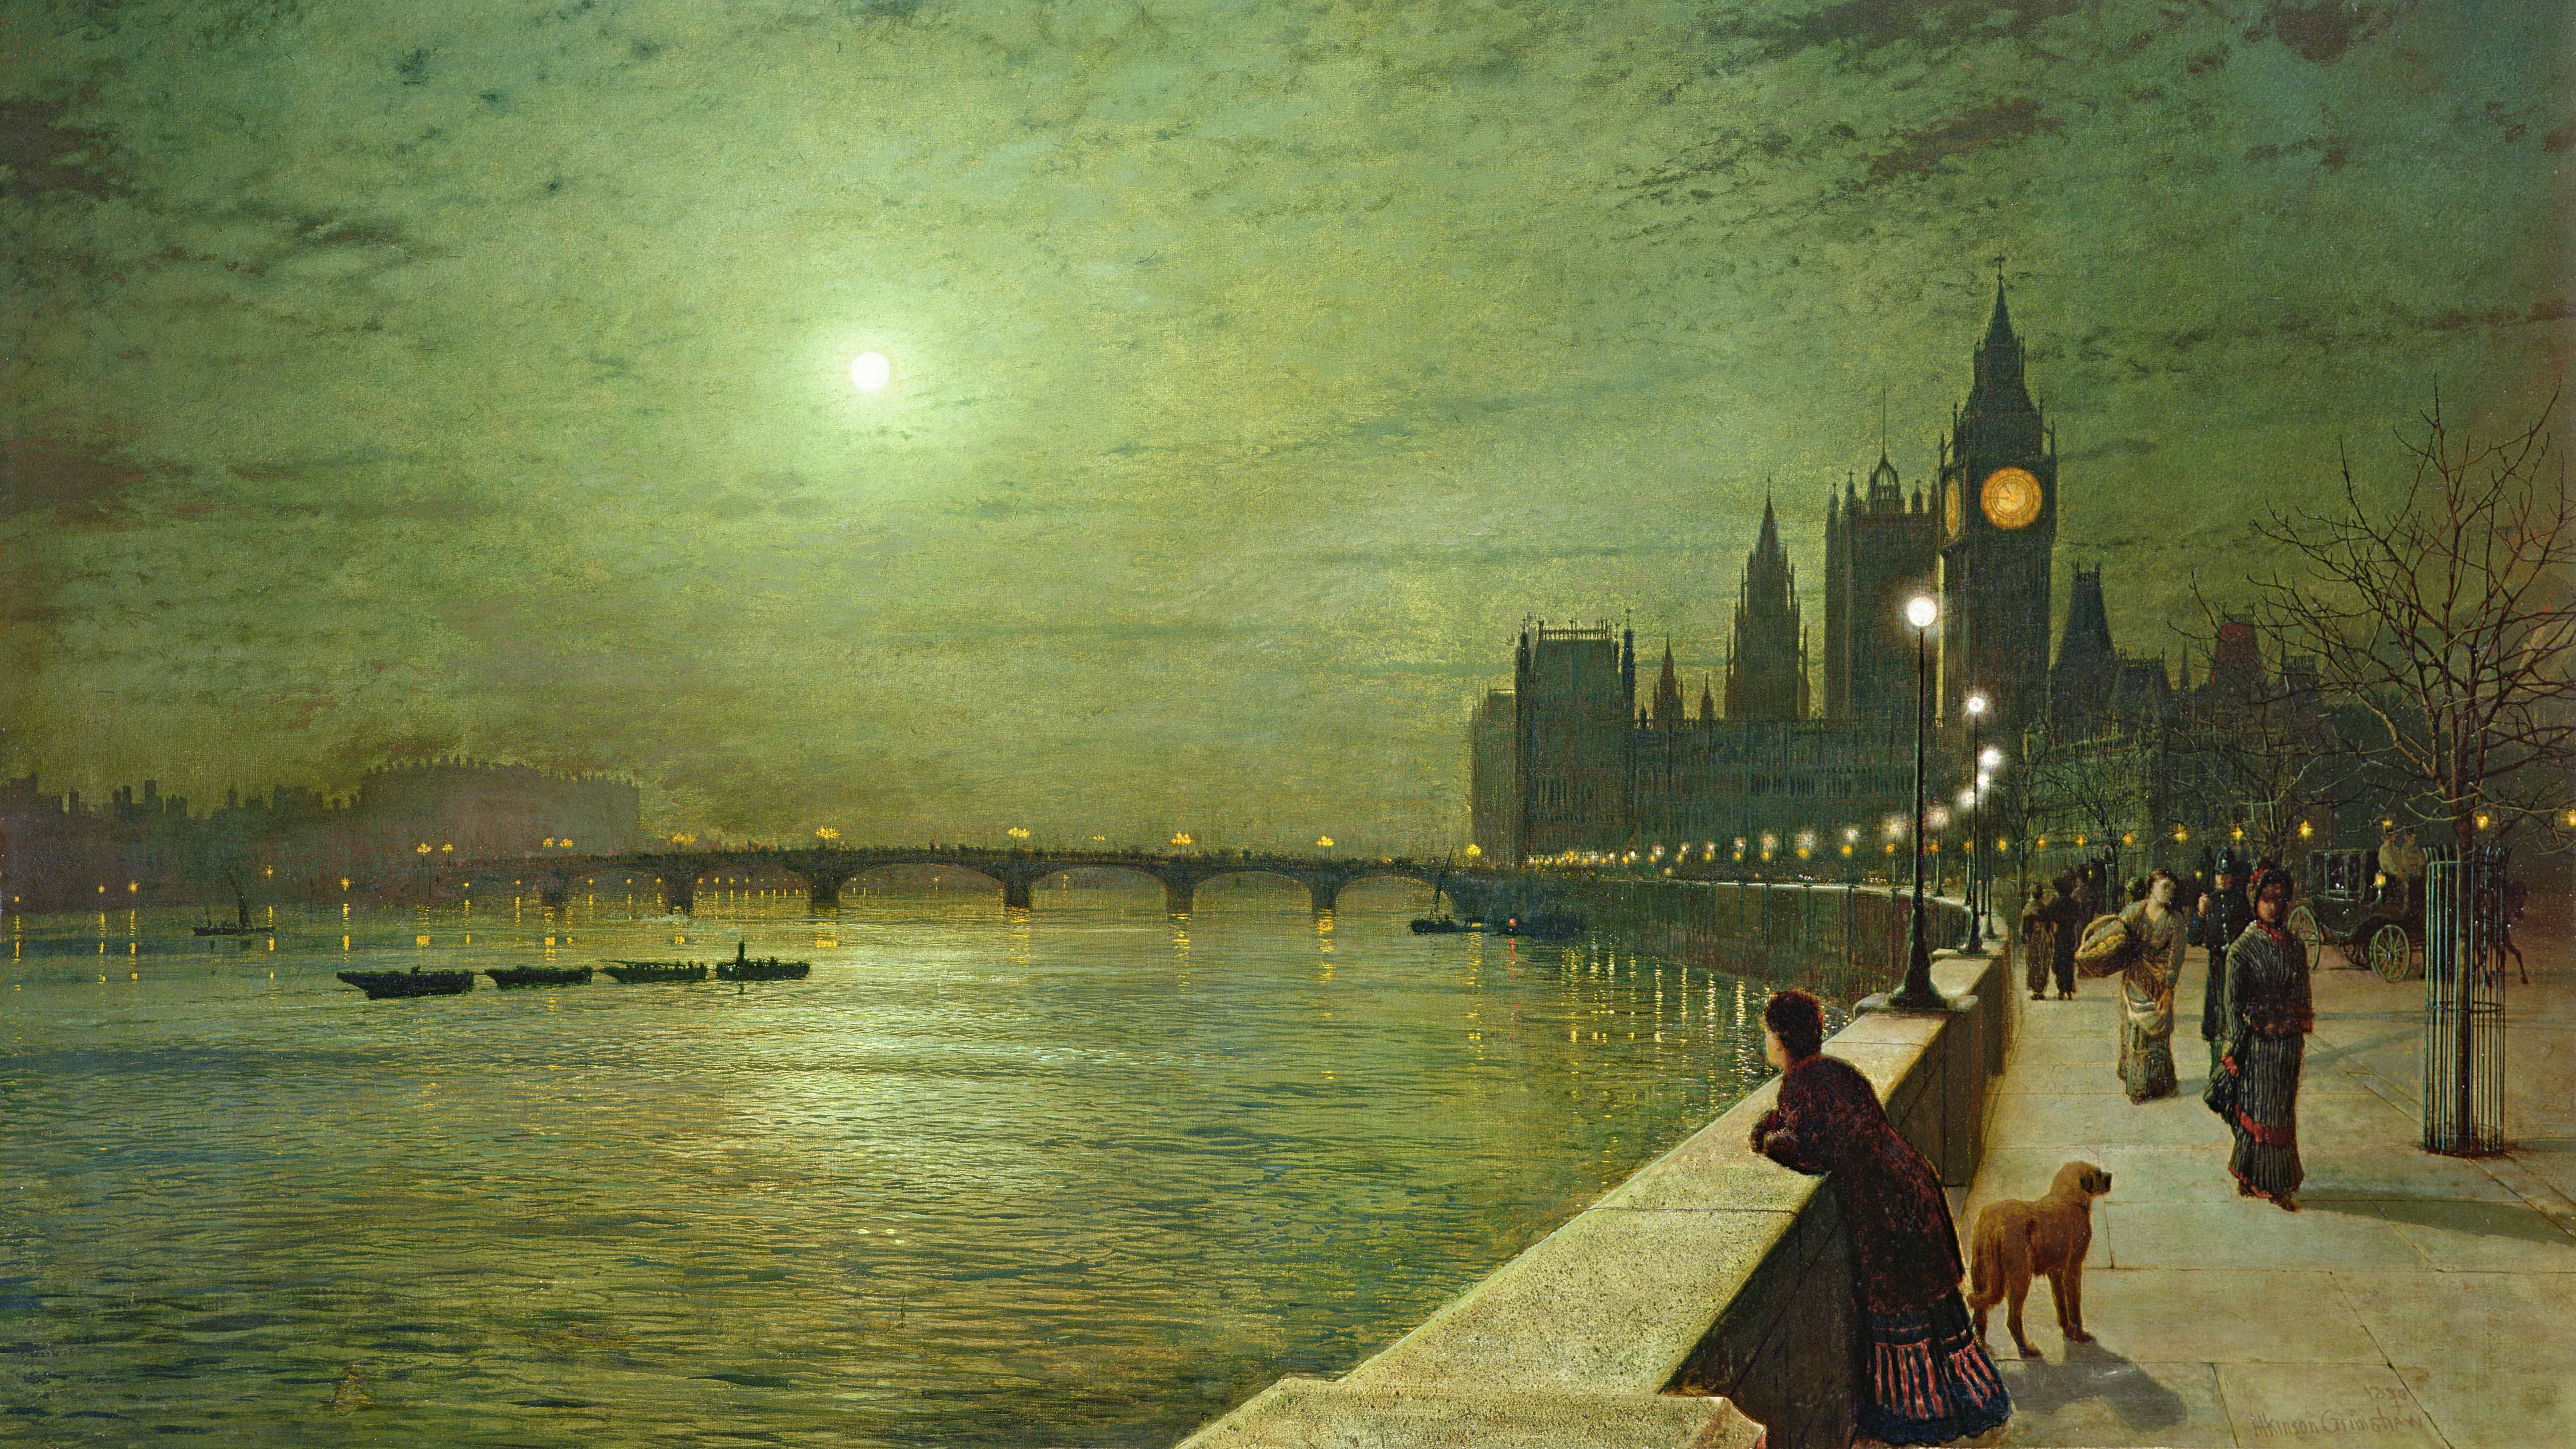 John Atkinson Grimshaw - Reflections on the Thames - Westminster - 1880 [5168 x 2907].jpg